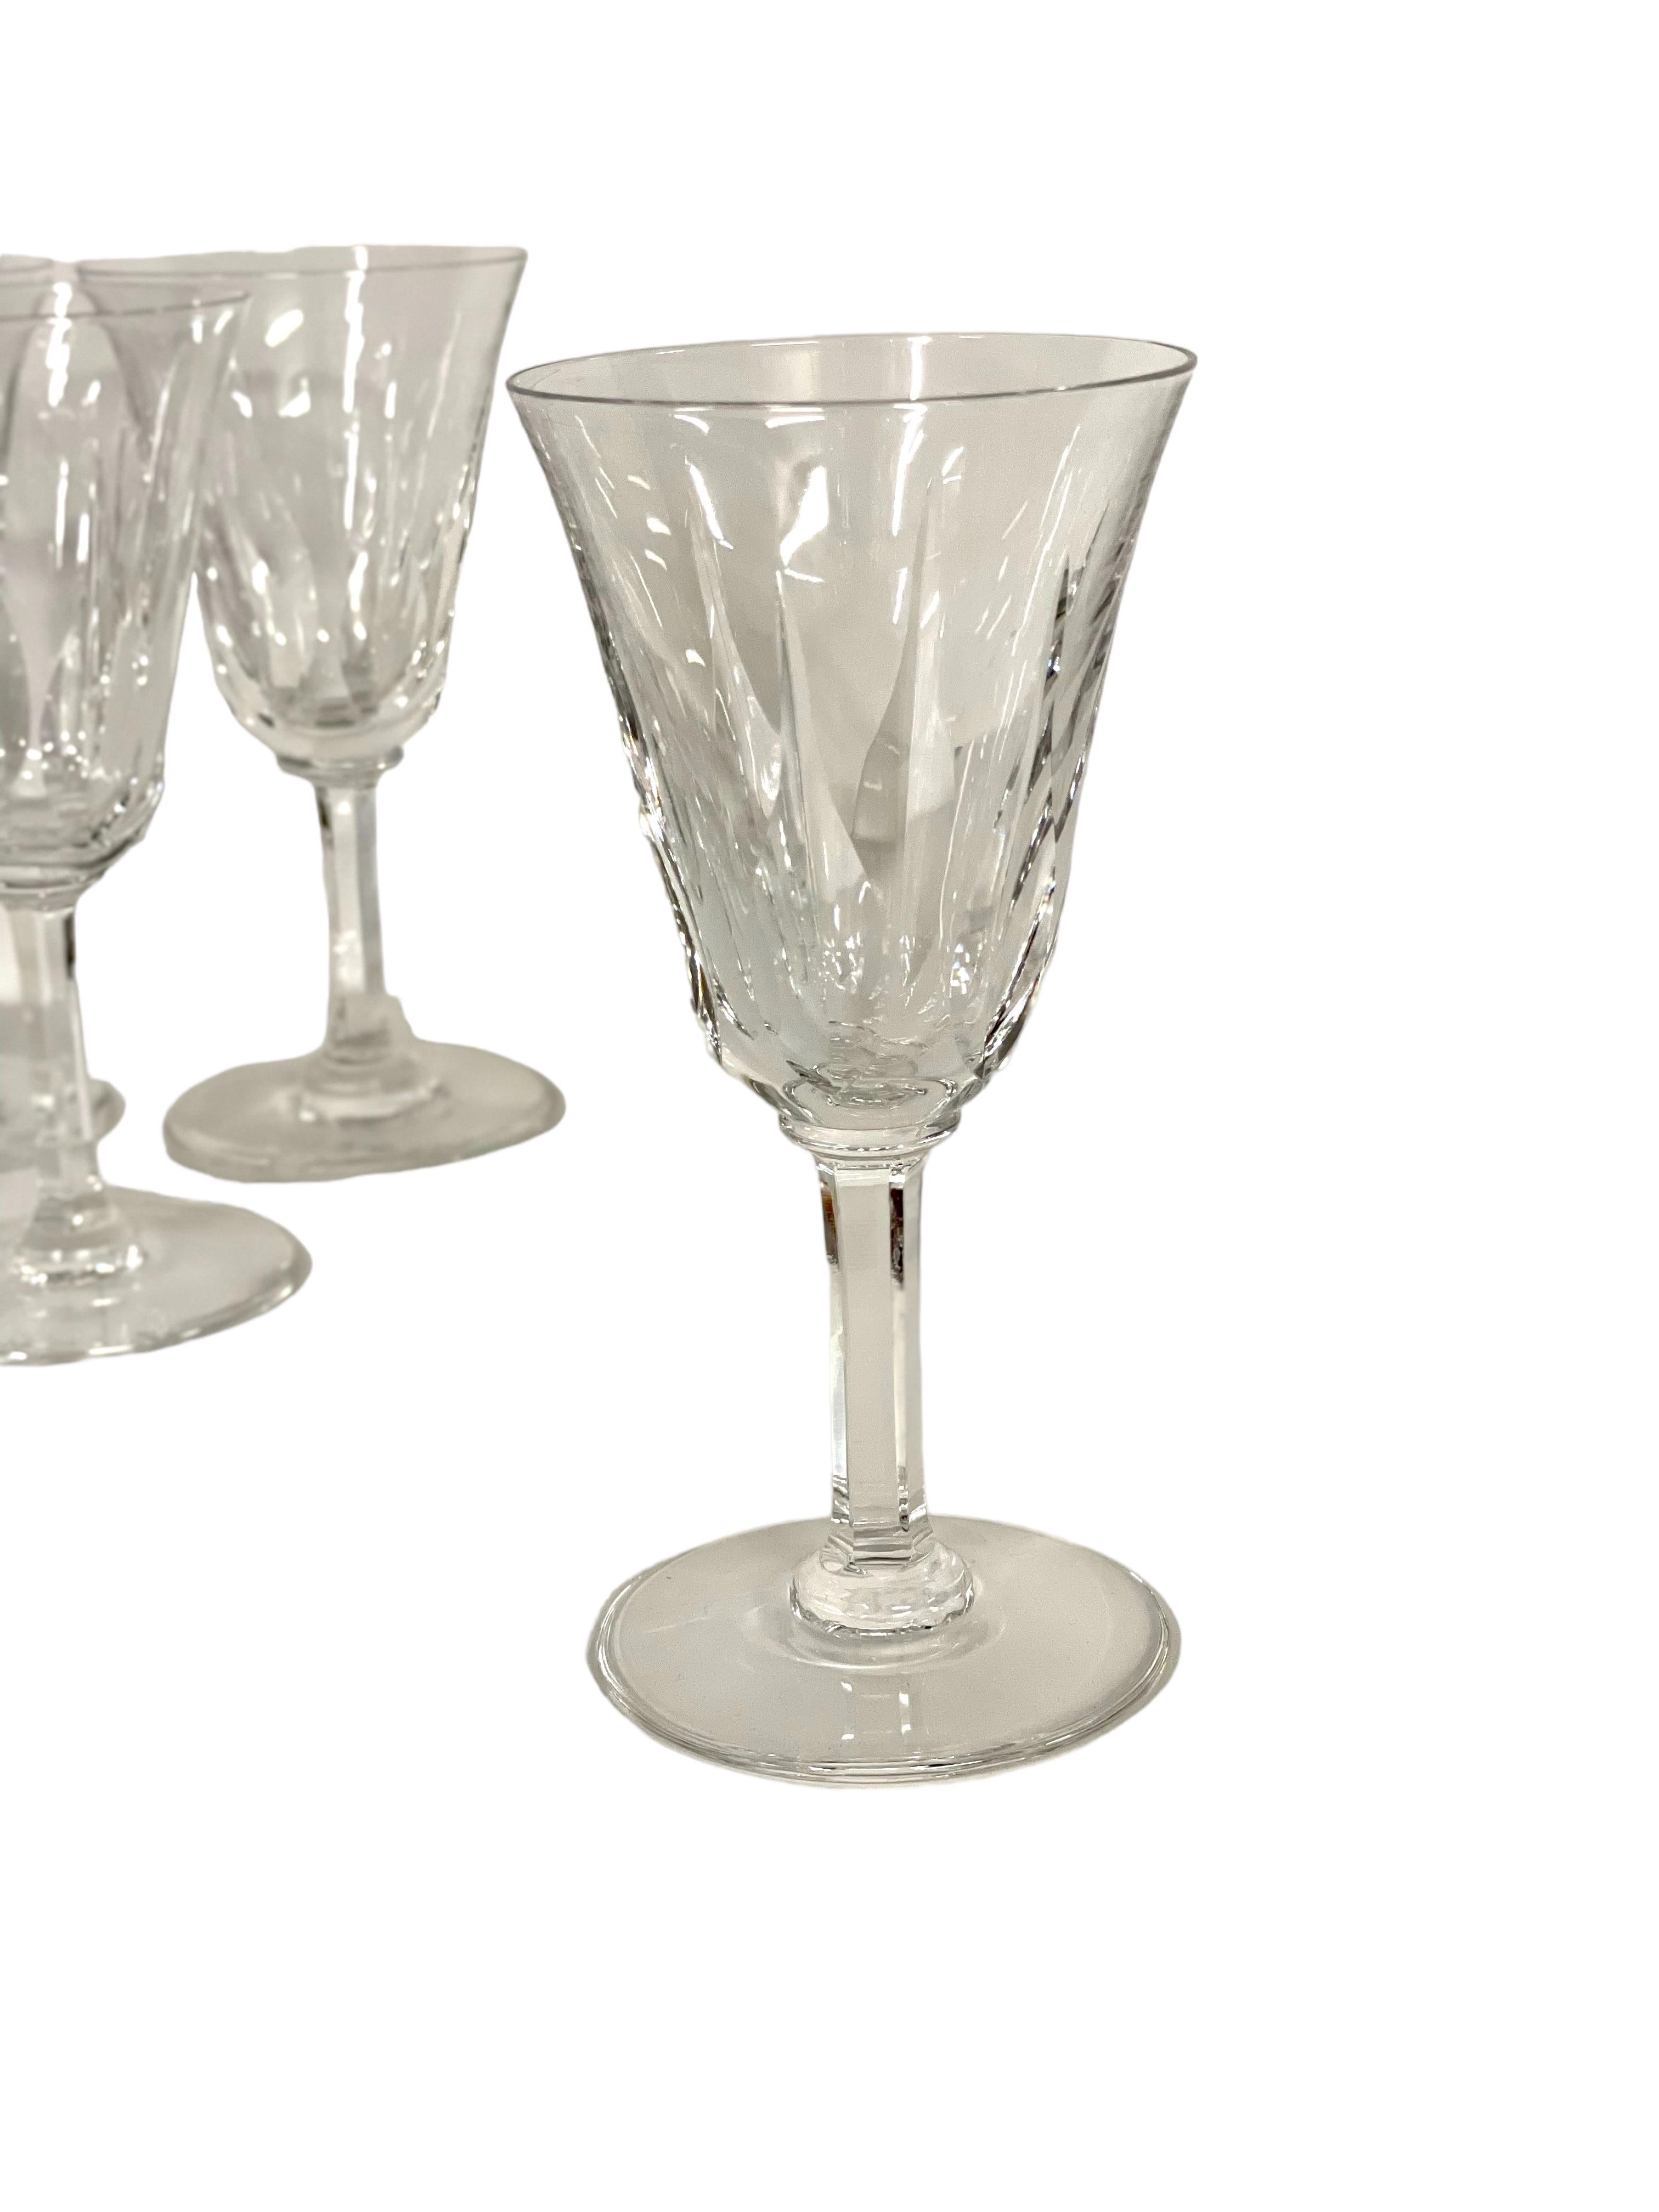 An exceptional set of 10 crystal red wine glasses in sparkling Saint-Louis crystal. The tulip- shaped chalice of each is cut with tall and pointed lozenges, while the stem features elegantly cut flat ribs. The glasses are all stamped 'Saint-Louis'